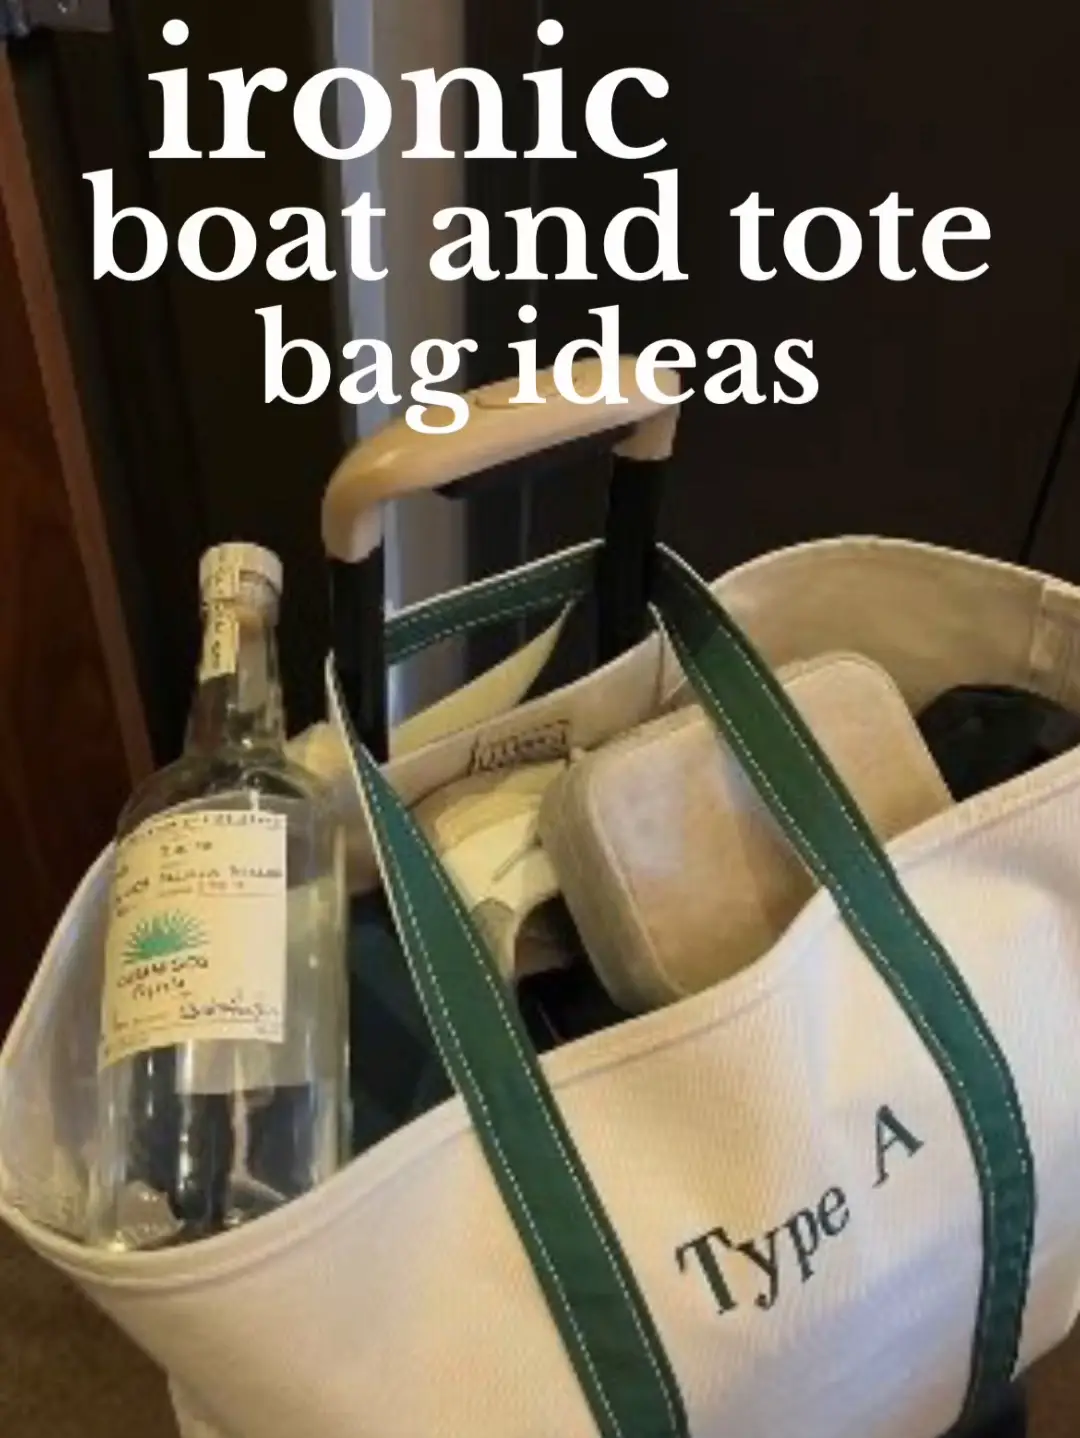 The Iconic, Ironic Boat and Tote